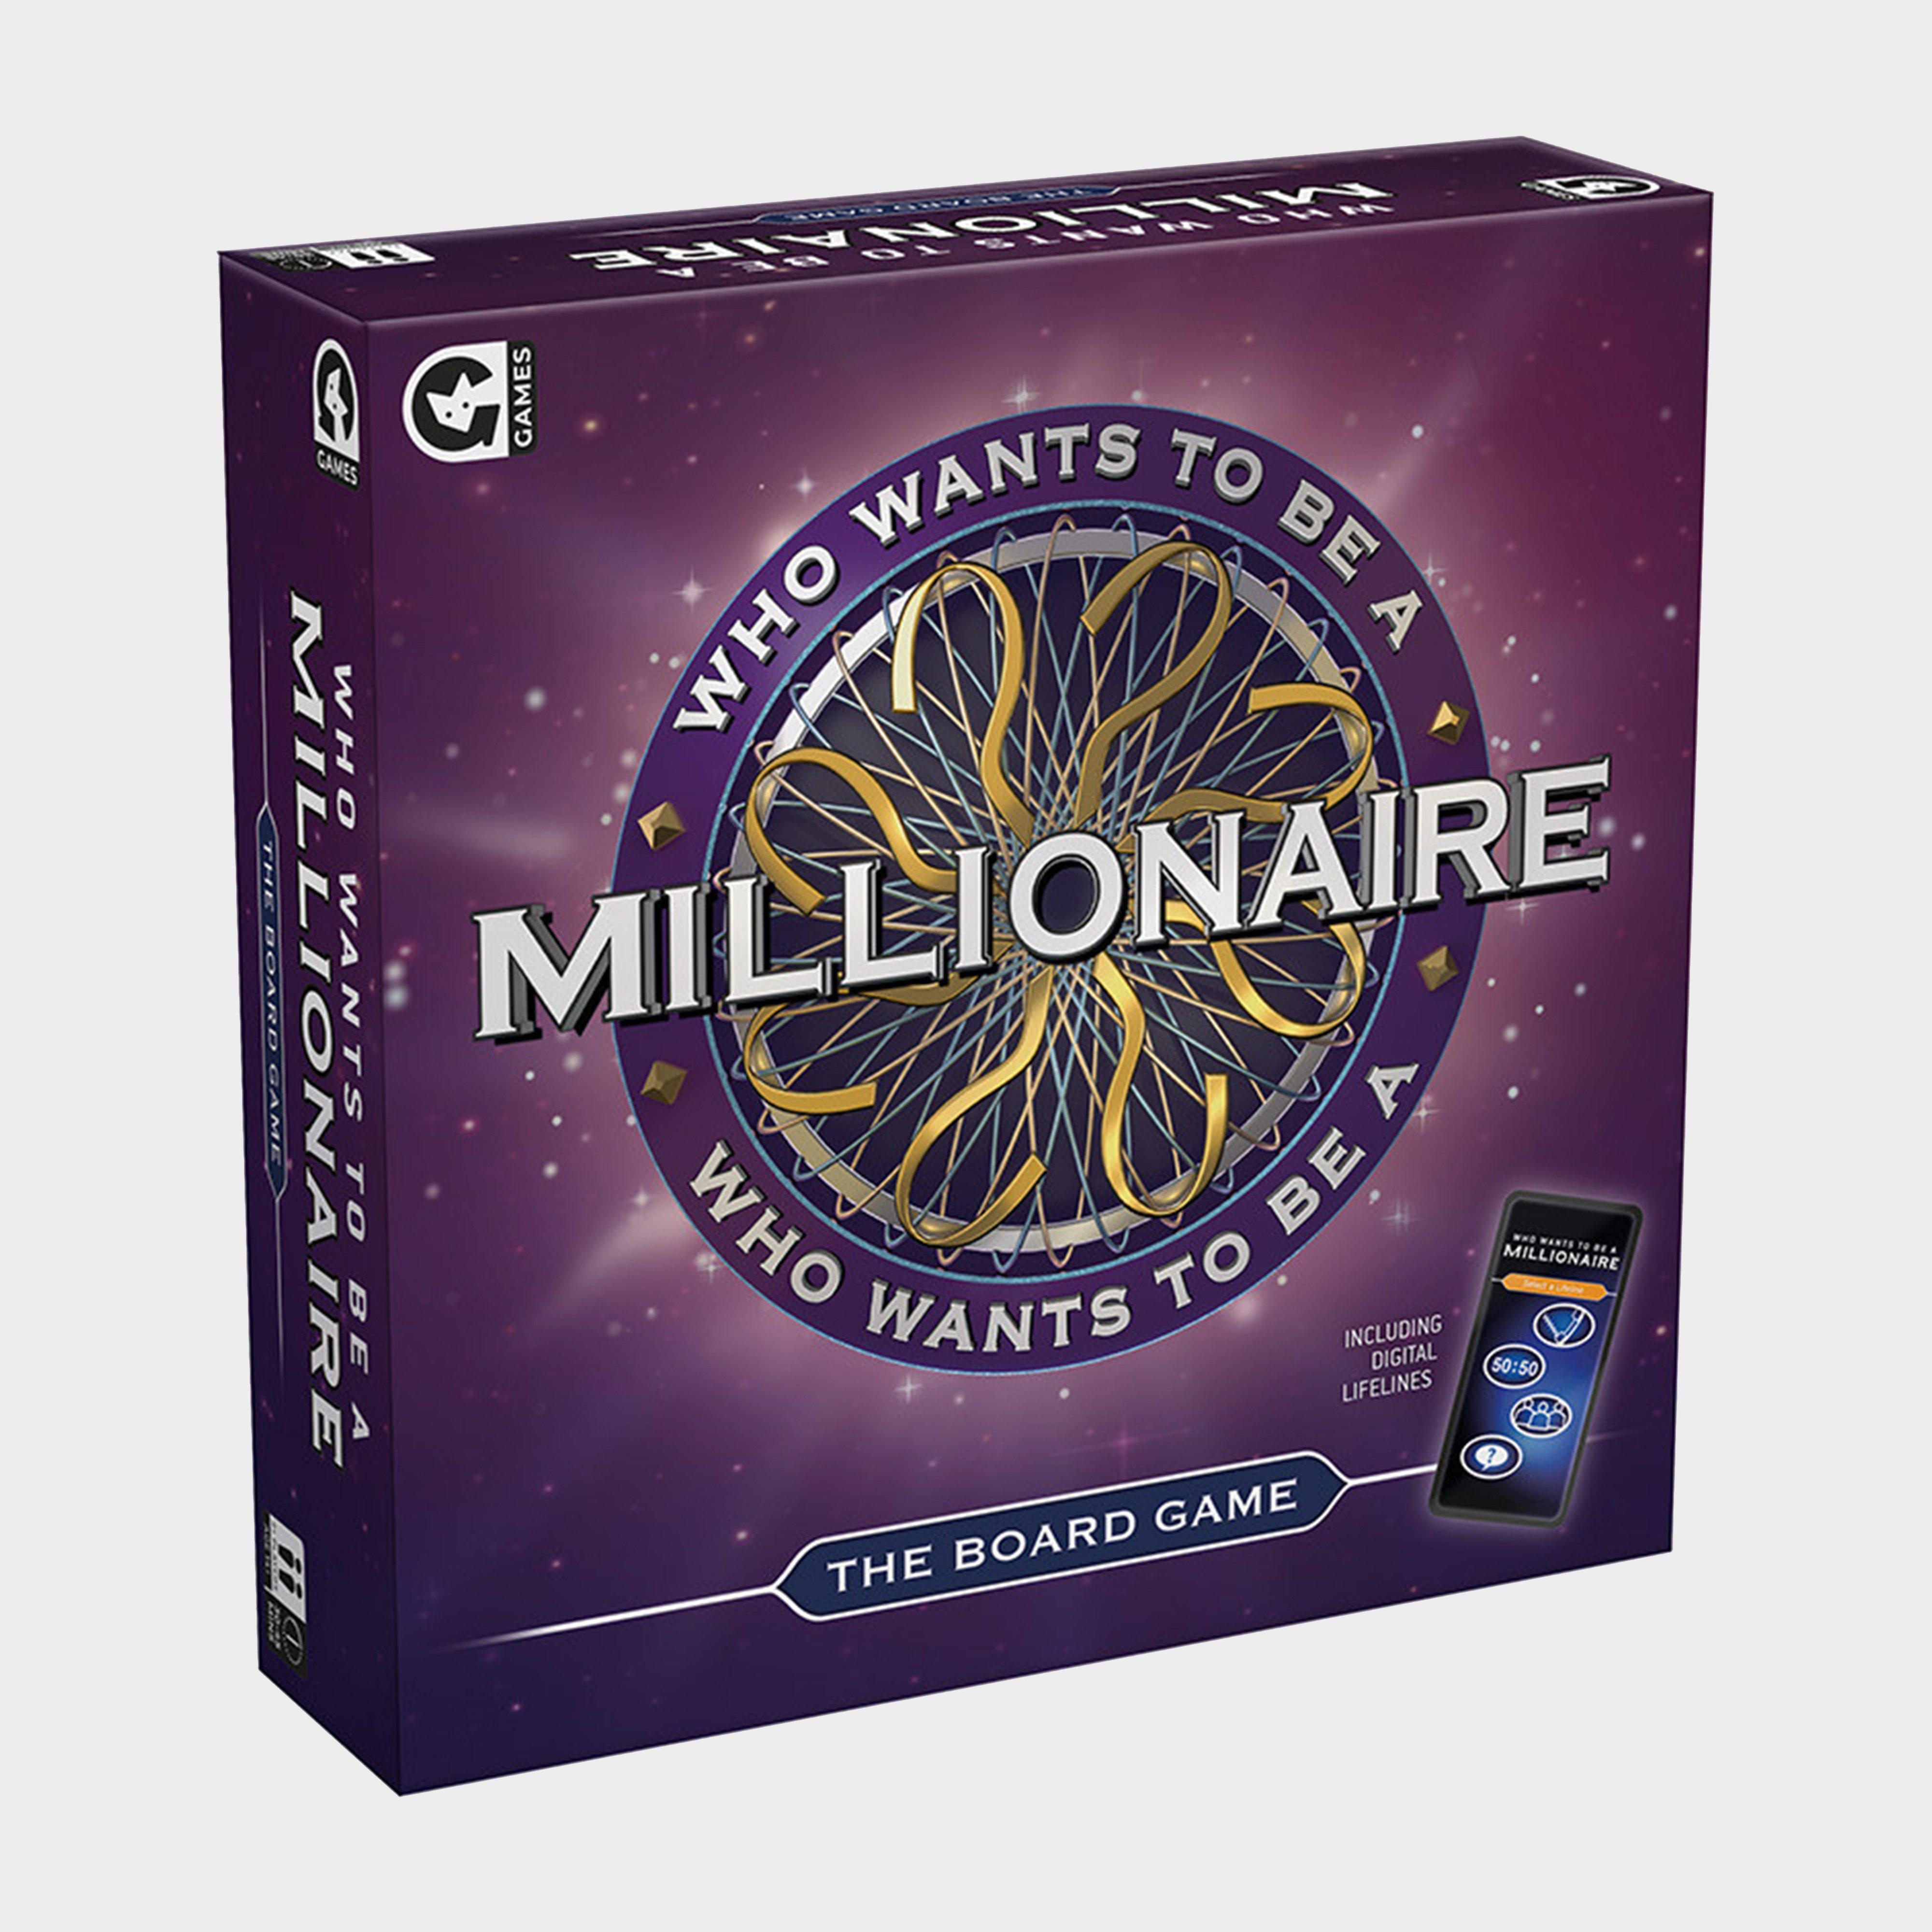 Wind Designs Who Wants To Be A Millionaire Board Game - Purple/game  Purple/game